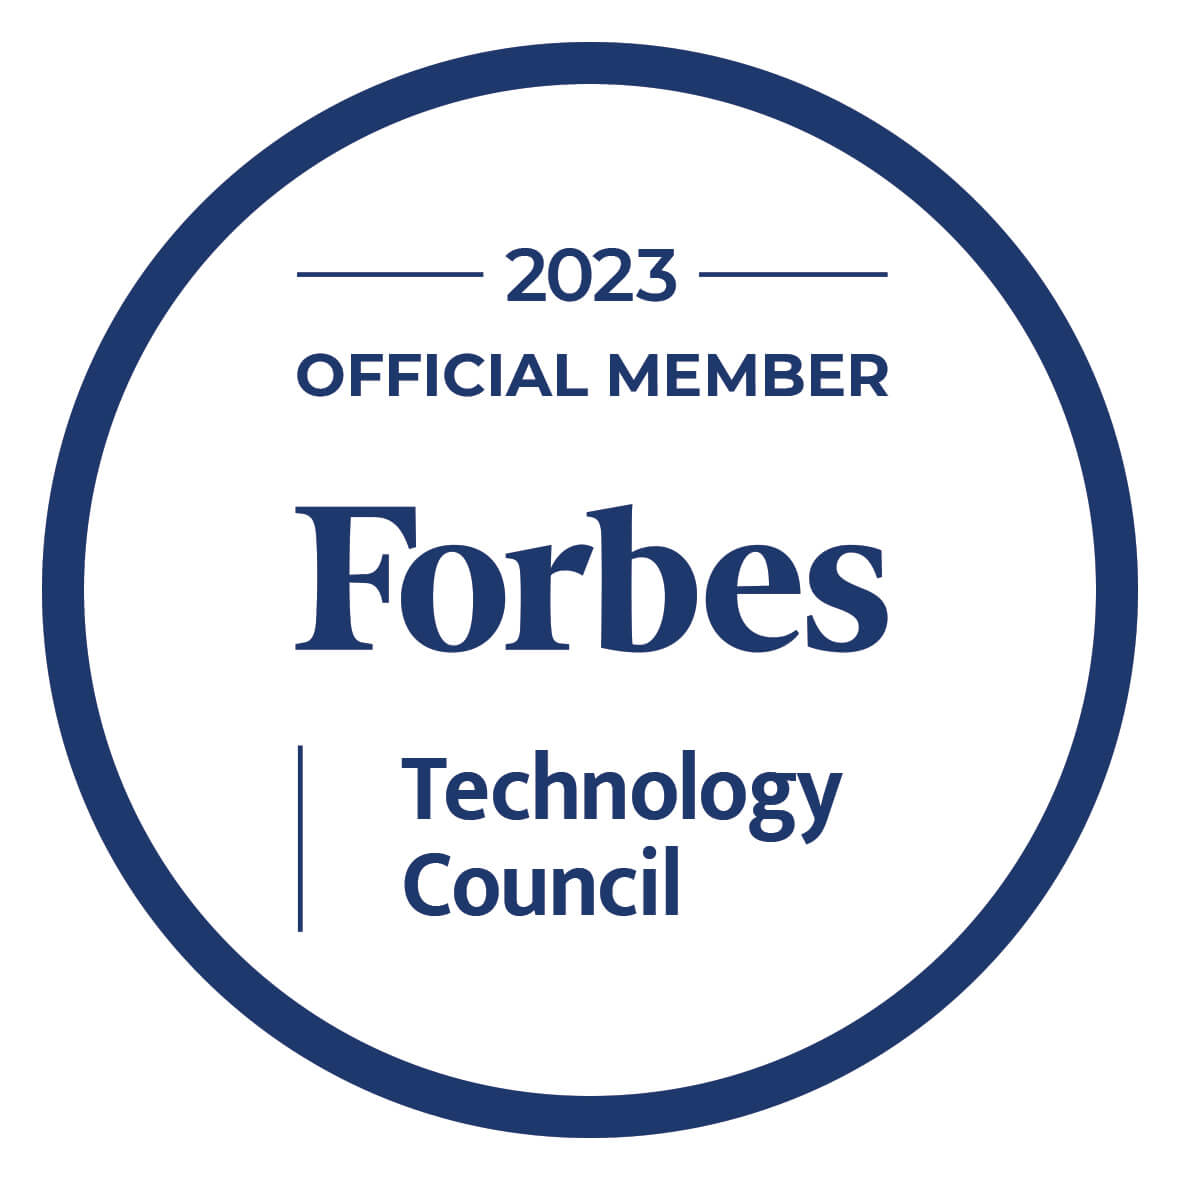 Top Management in the Forbes Technology Council